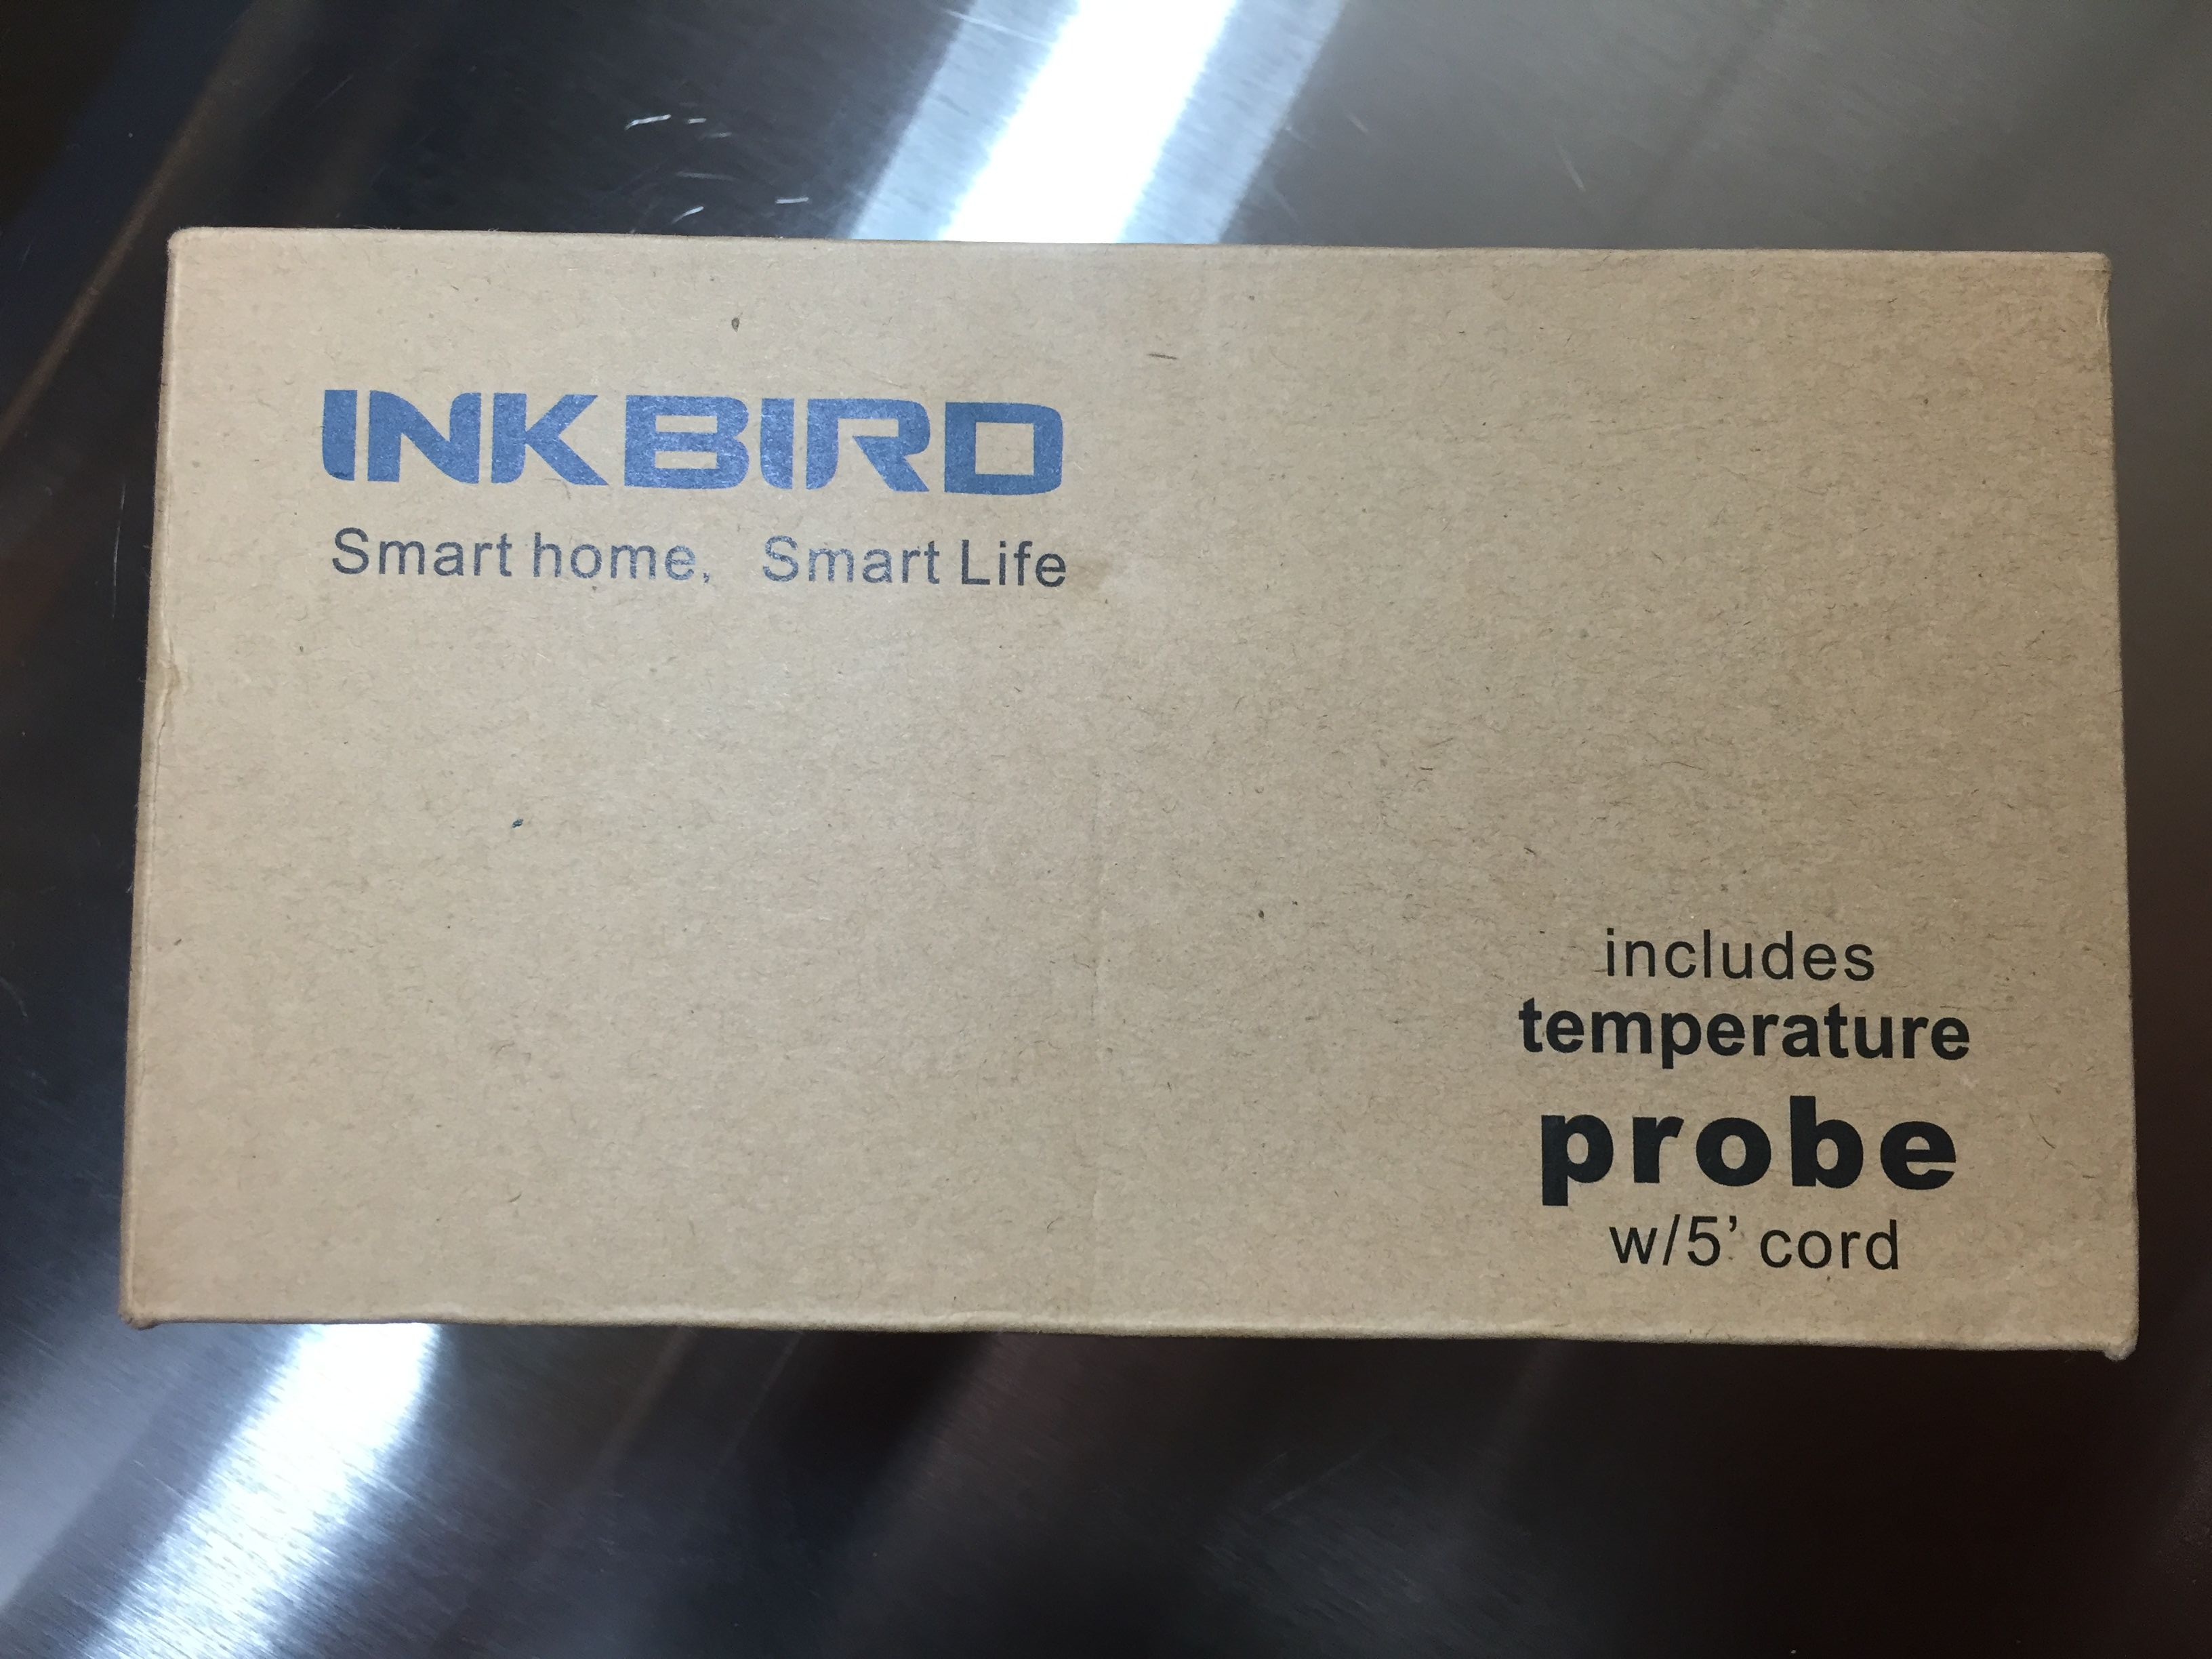 Inkbird Temperature Controller Review – Land Hermit Crab Owners